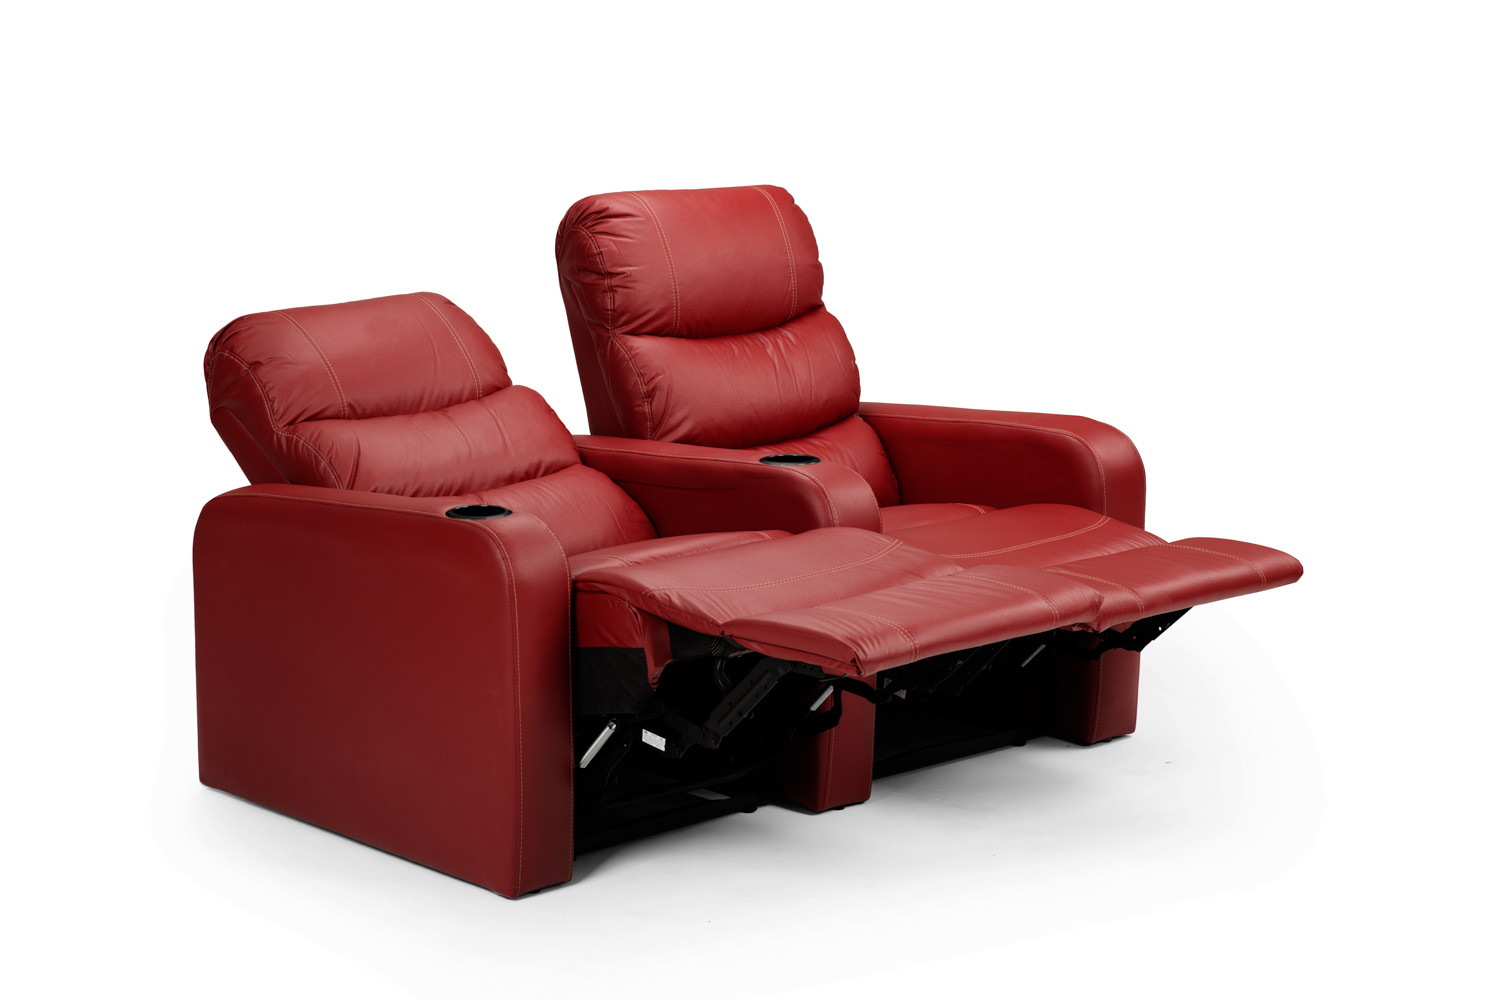 Cinema Pro 2 Seater Recliner - Red Recliner Couches - 5